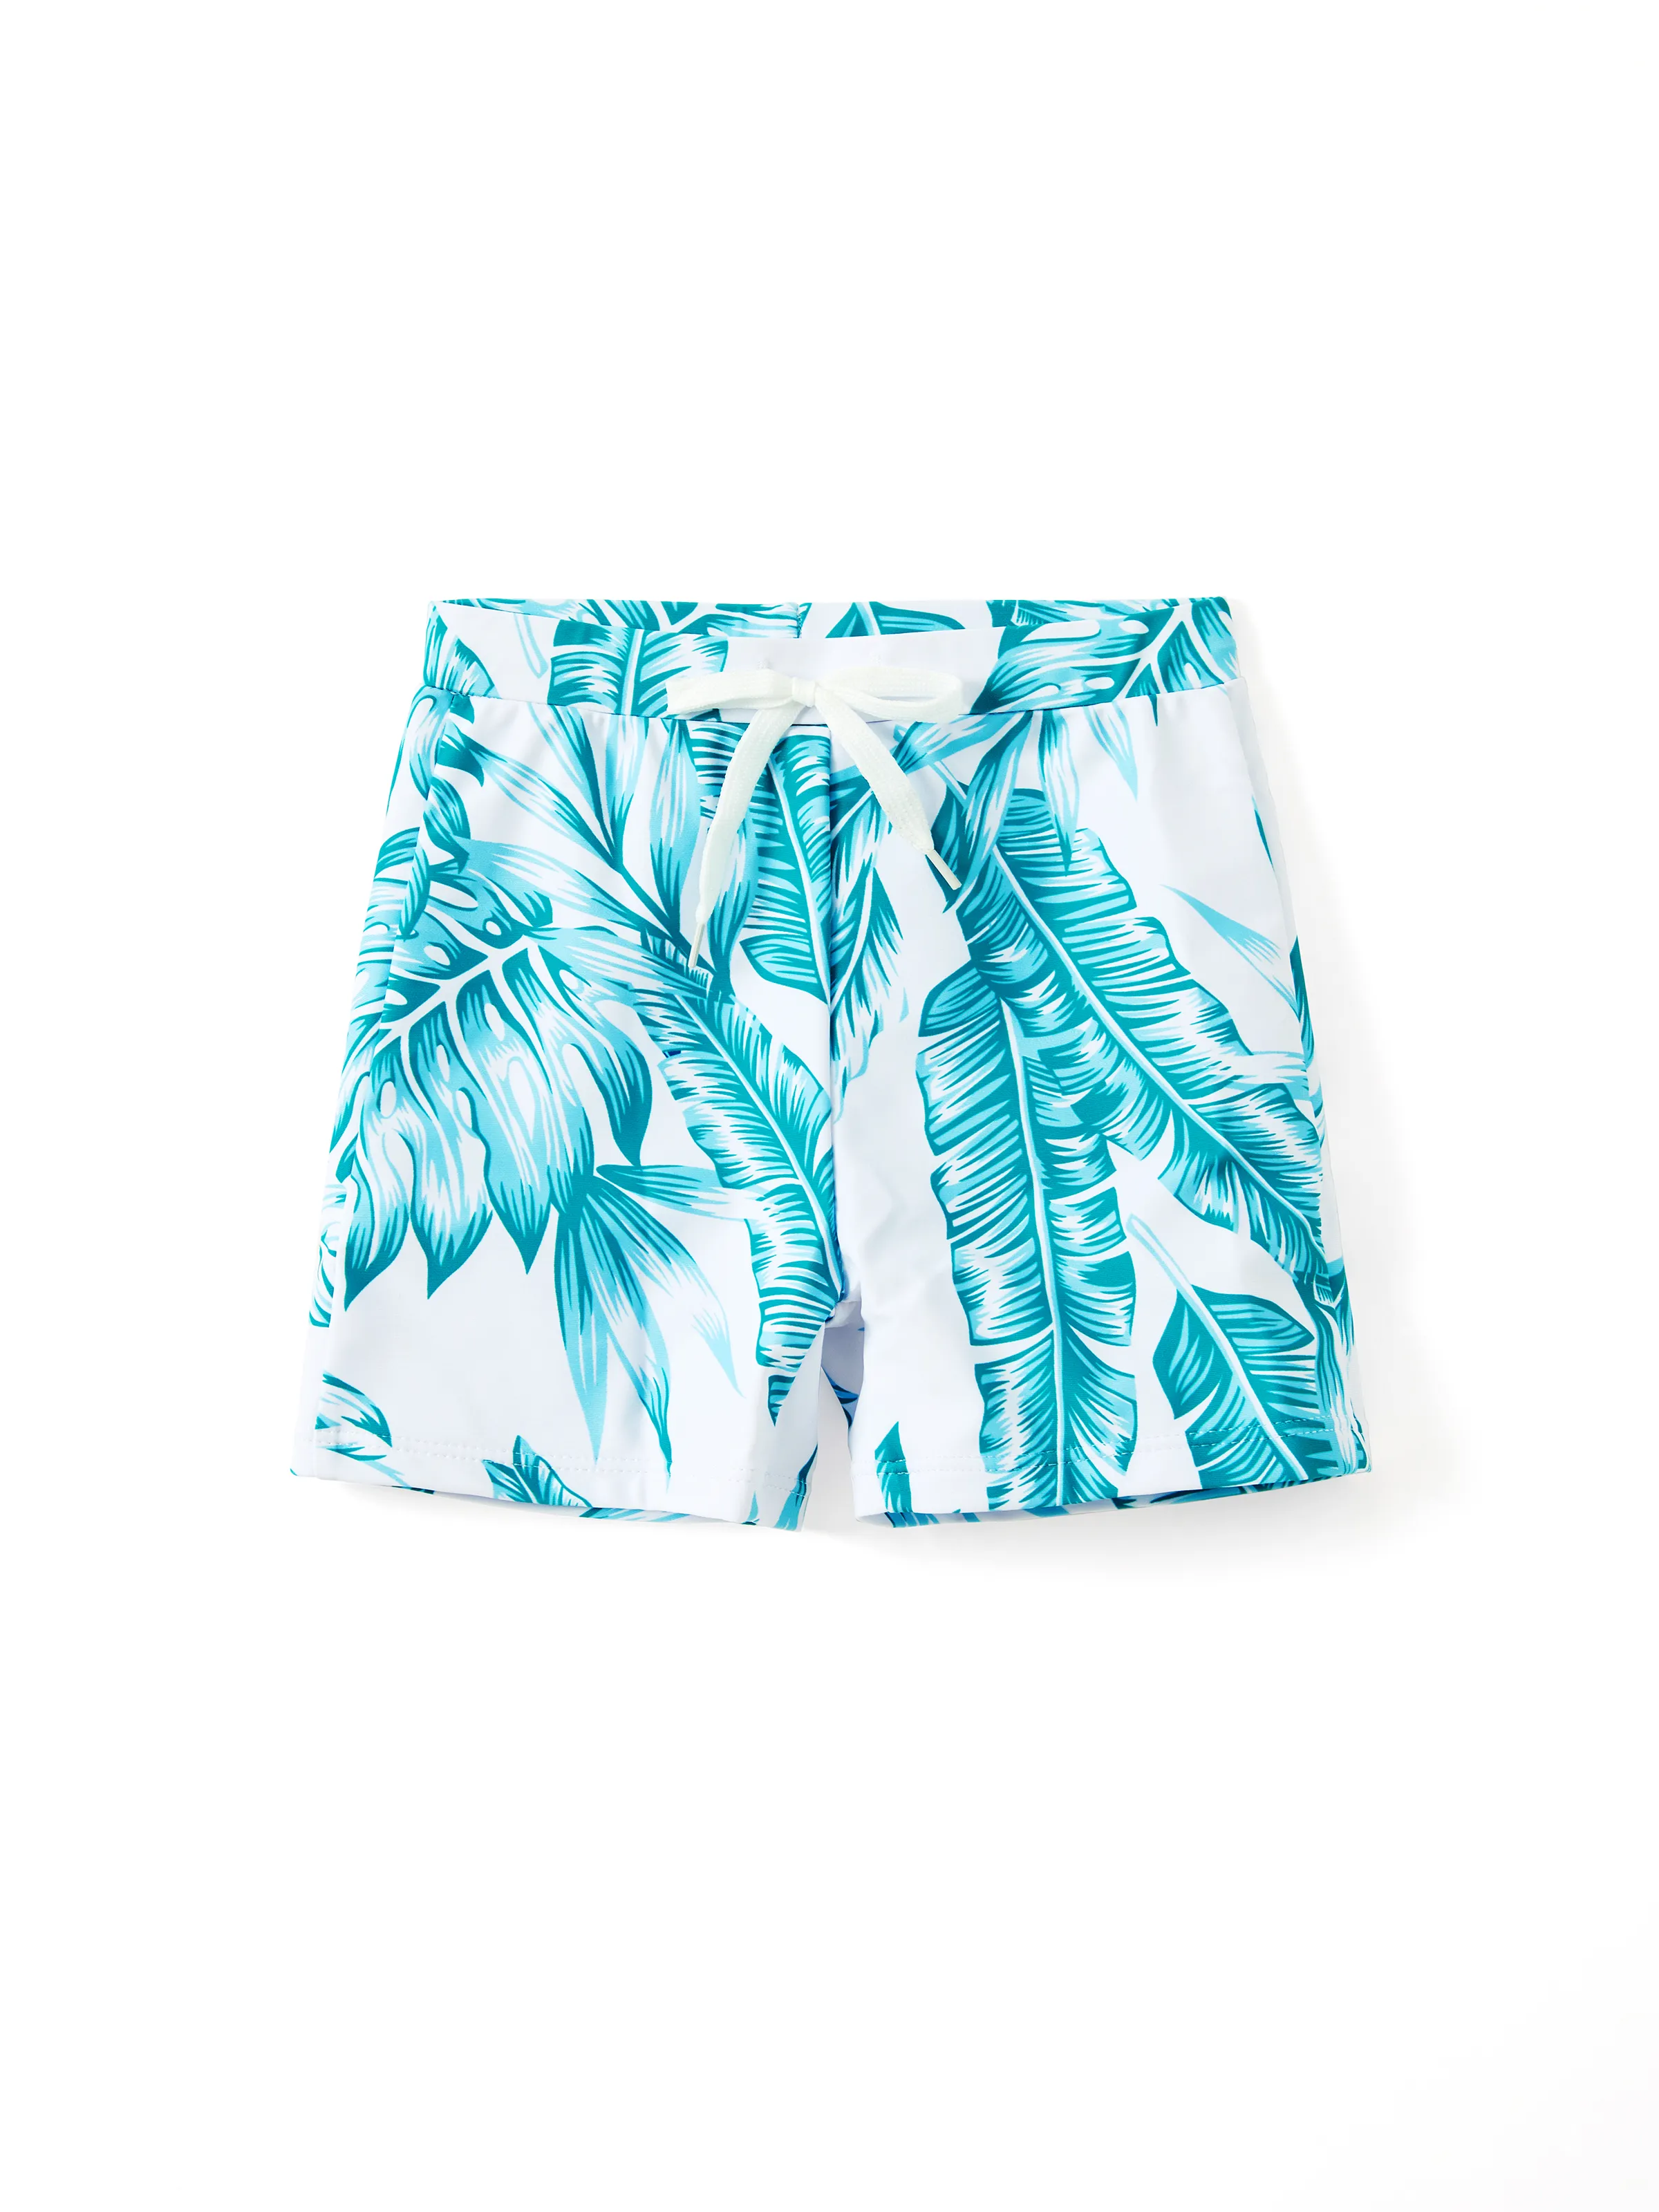 

Family Matching Colorblock Textured Self-tie One-Piece Swimsuit and Allover Palm Leaf Print Swim Trunks Shorts